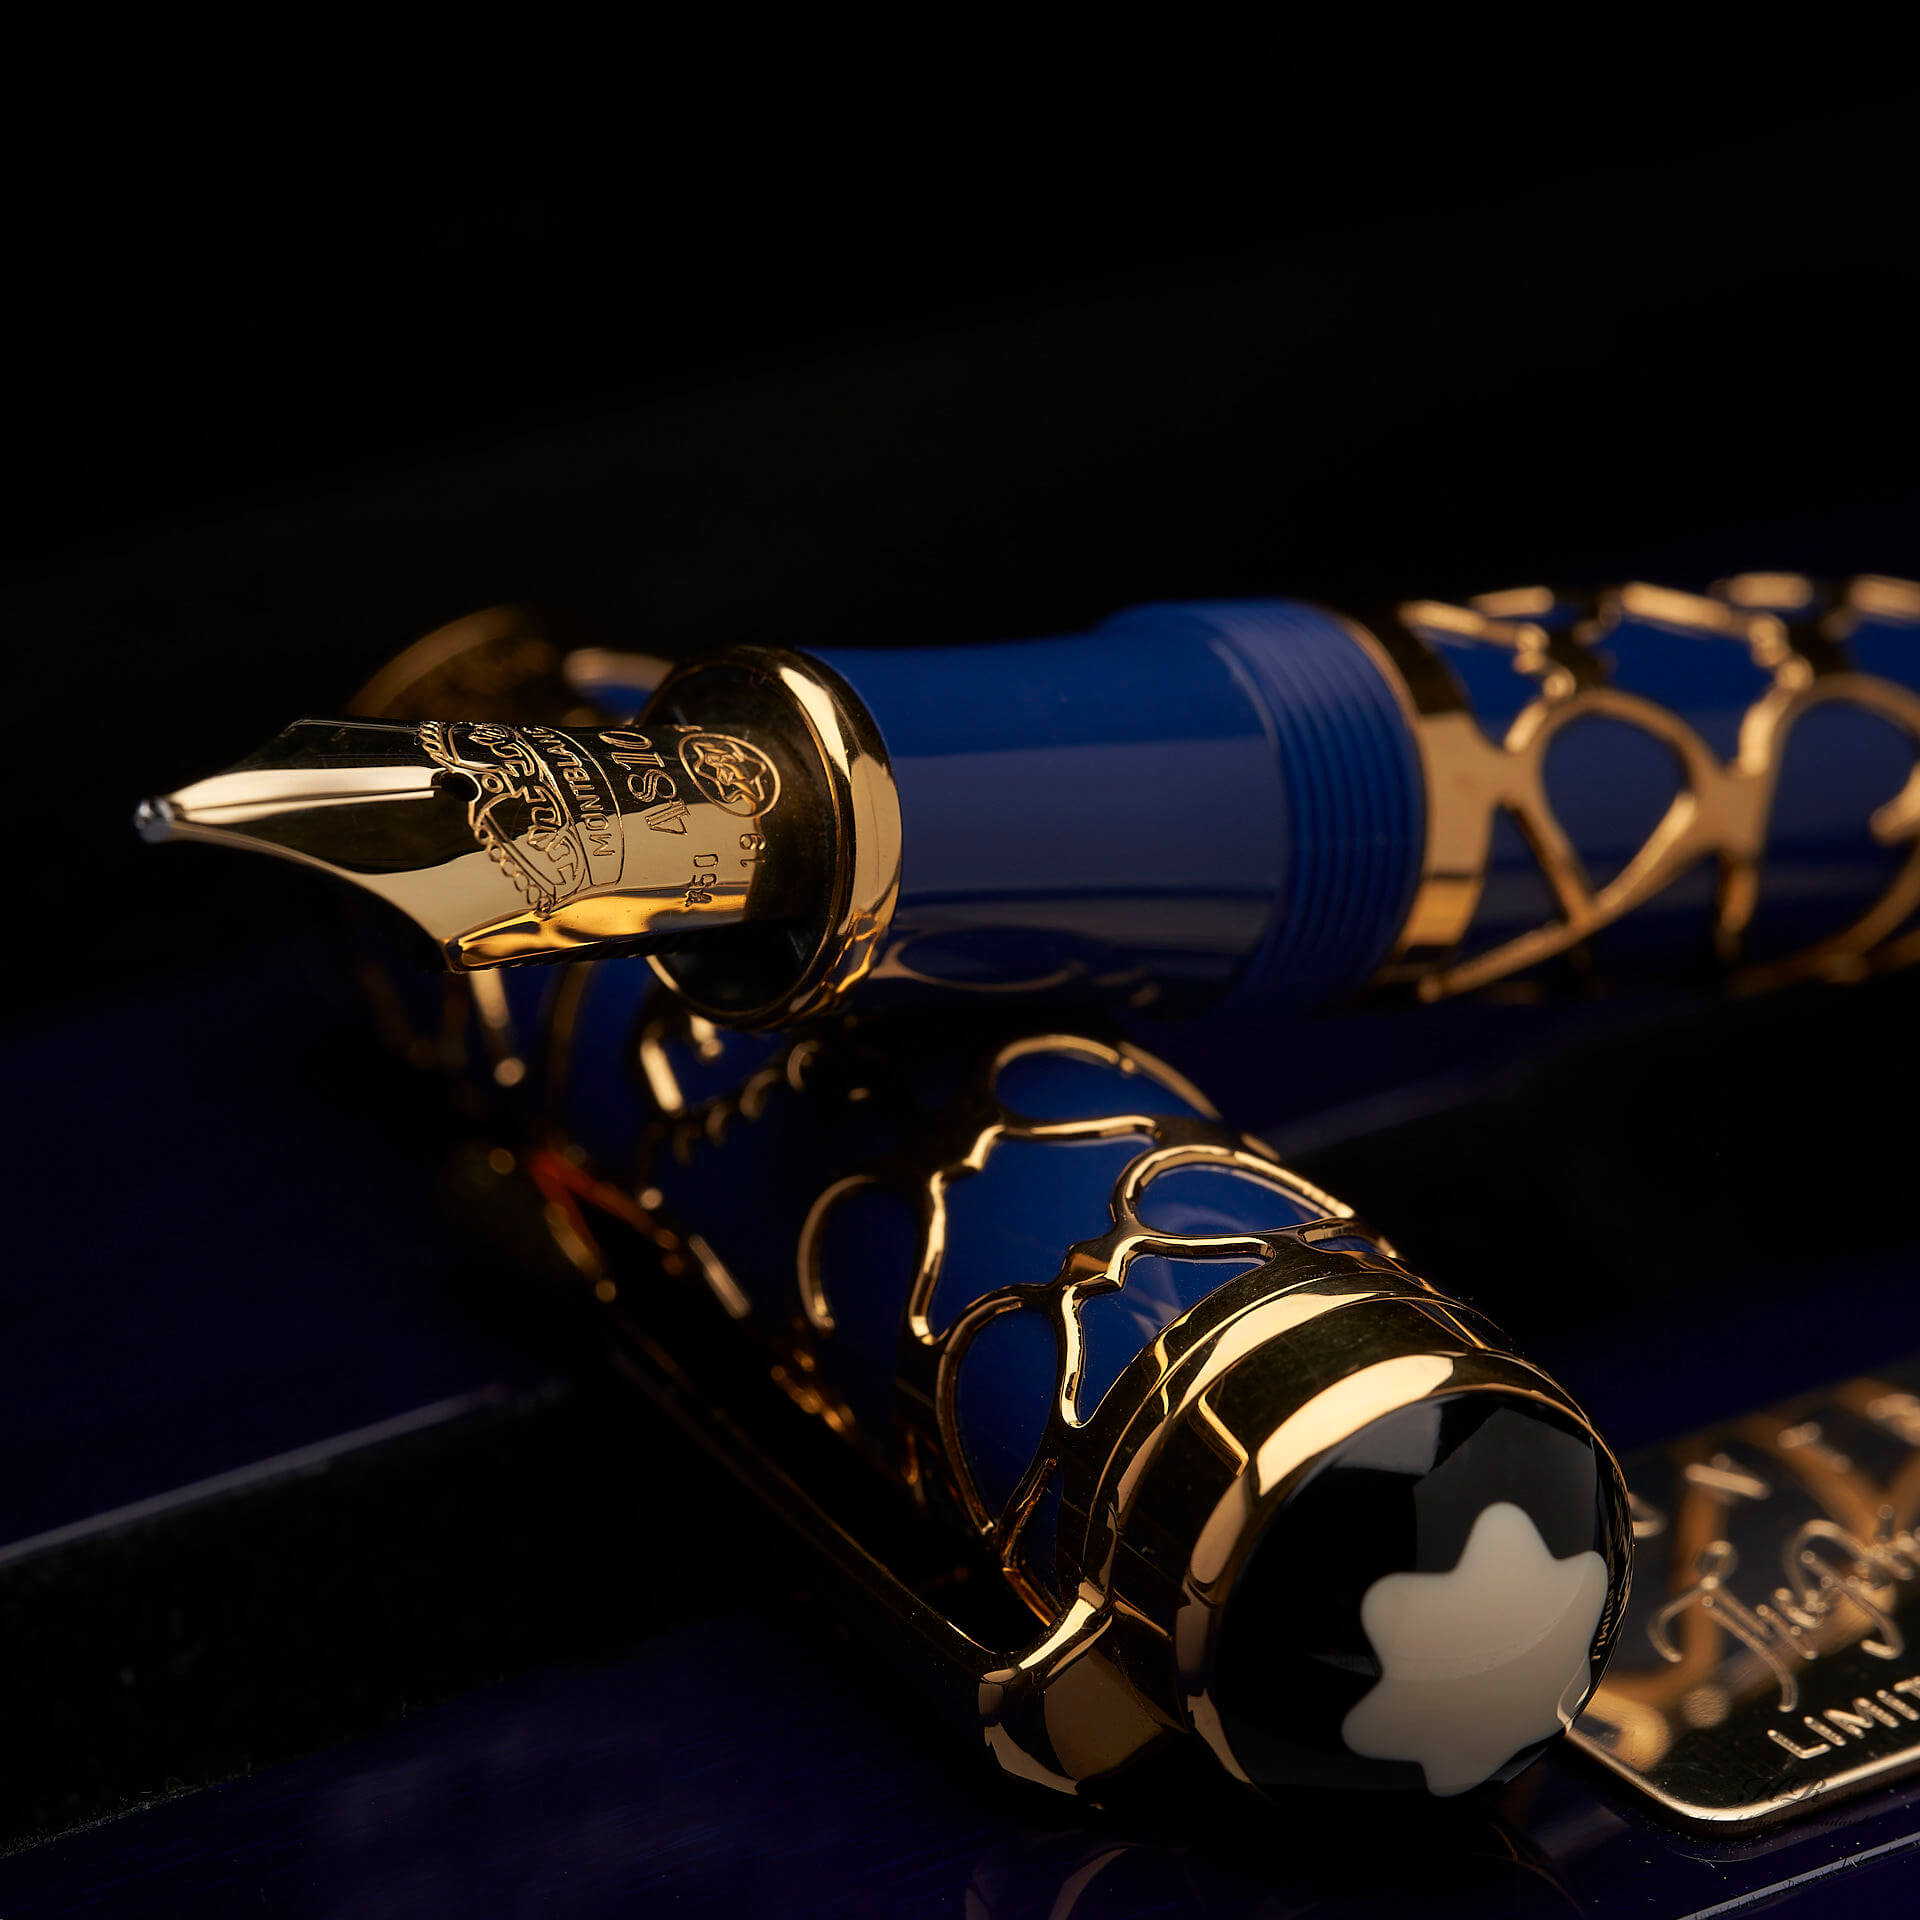 montblanc-patron-of-the-art-the-prince-regent-limited-edition-4810-füller-id-28619